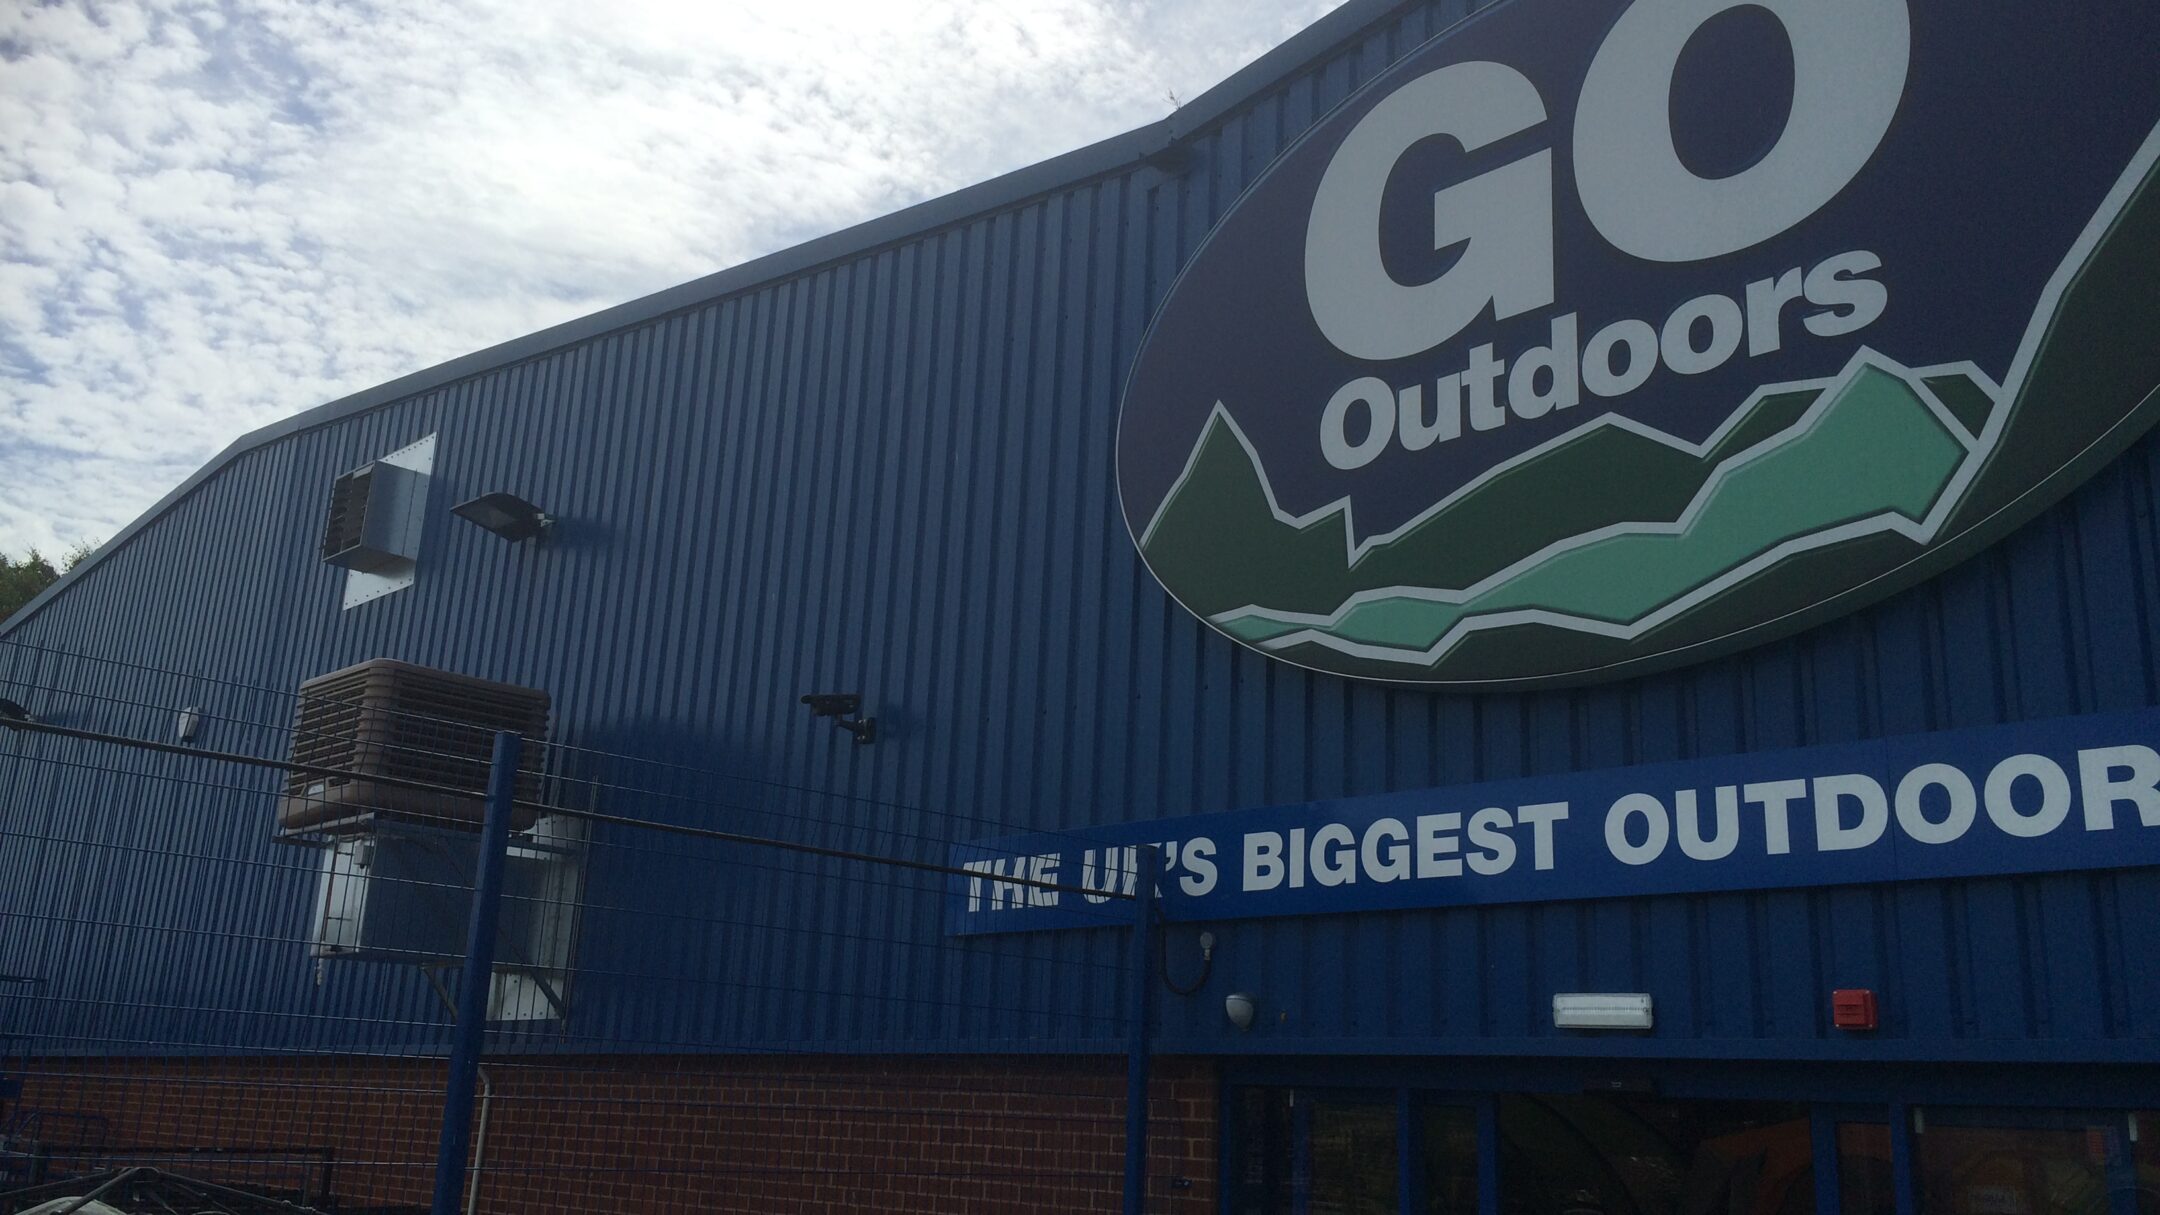 Number of GO Outdoors locations in the UK in 2024